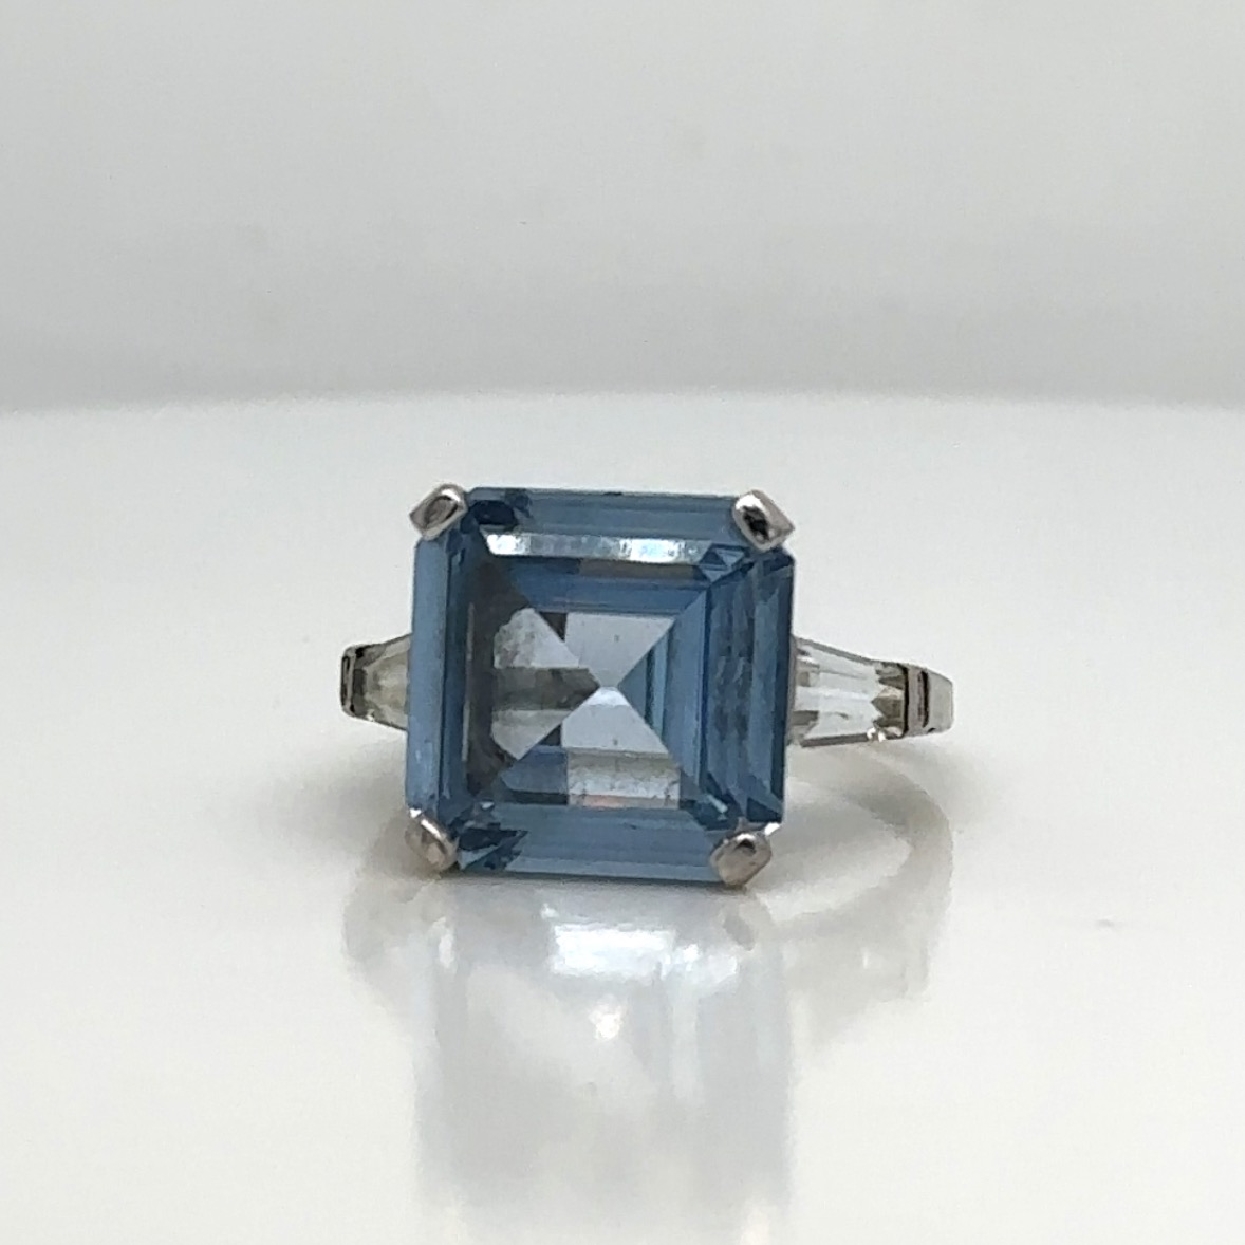 10K White Gold Square Emerald Cut Blue Topaz Ring with Baguette Accent Diamonds Size 4.5